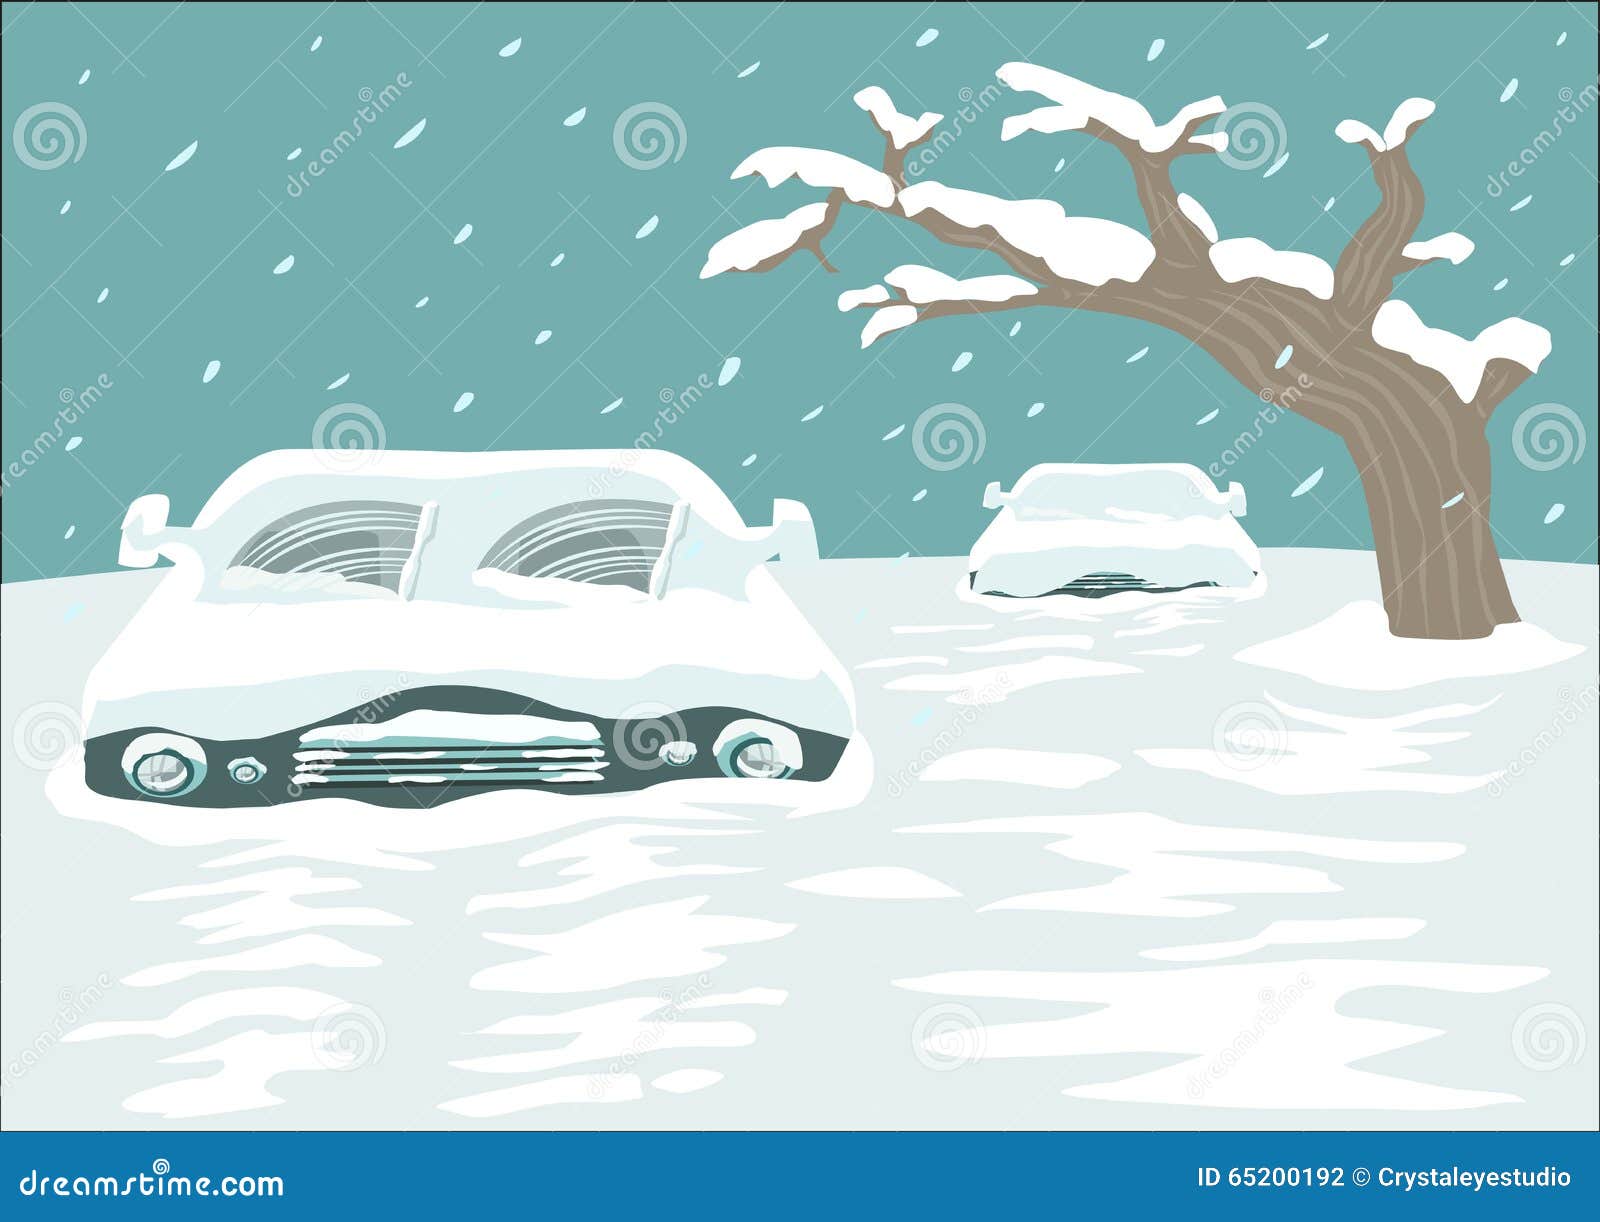 clipart car stuck in snow - photo #50